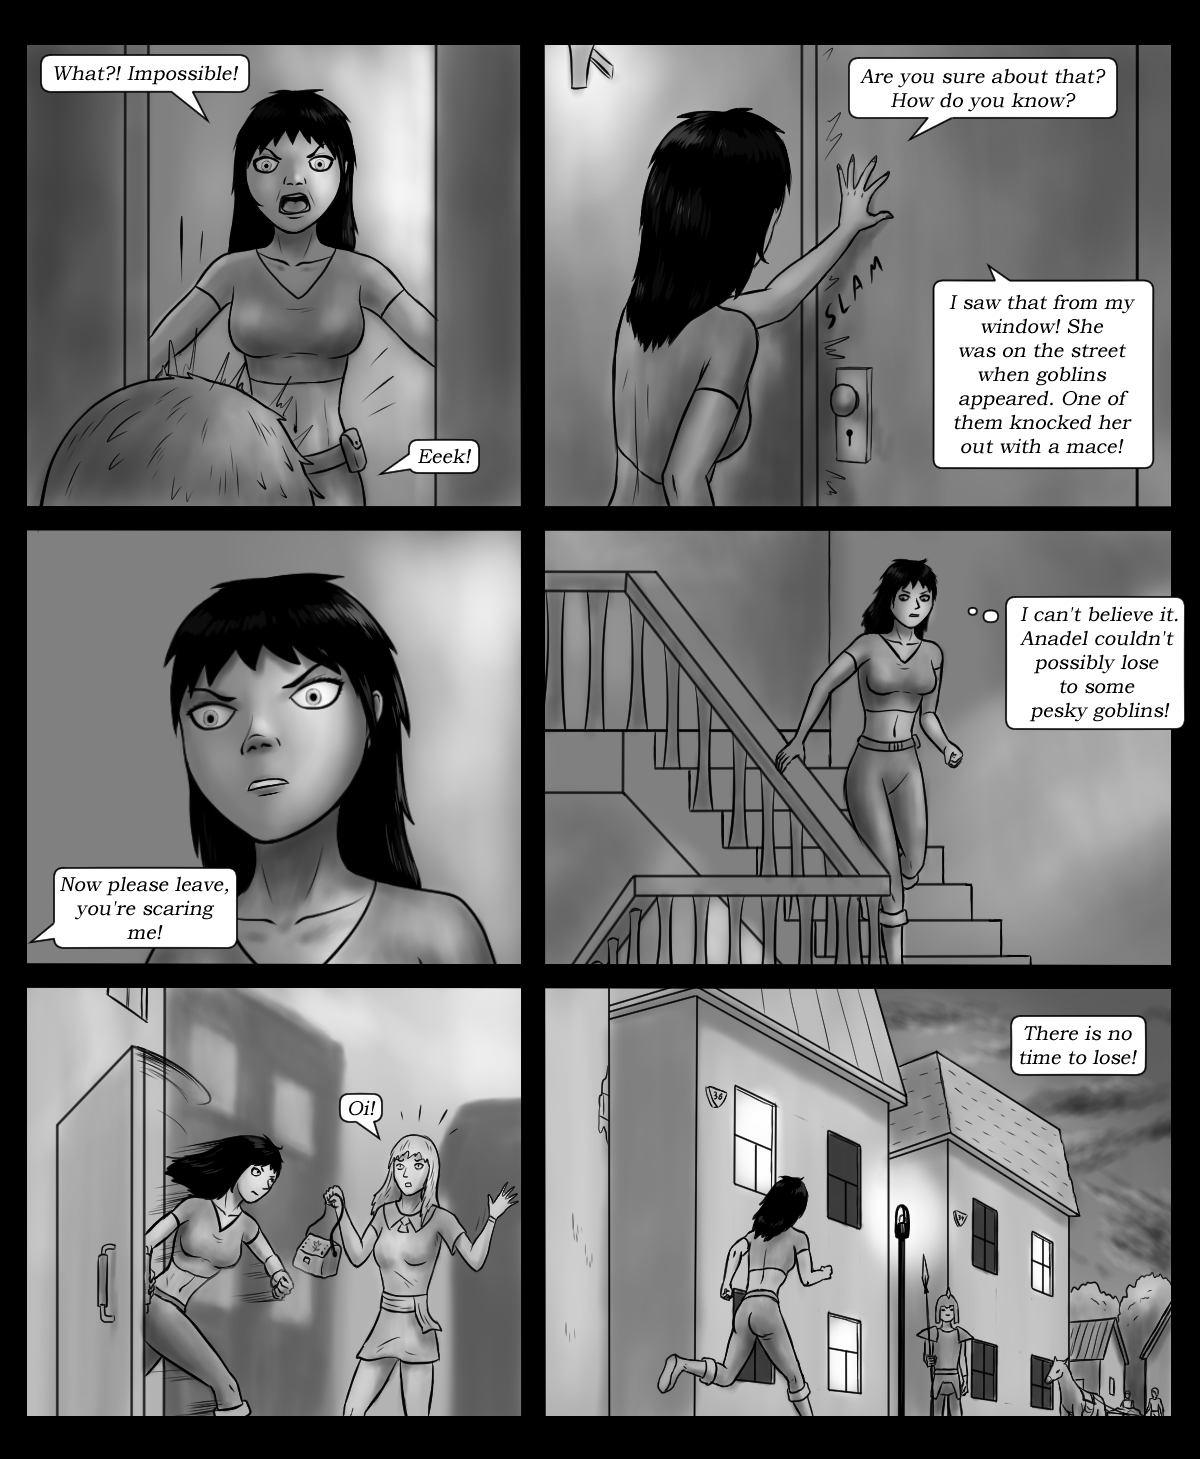 Page 36 - No time to lose